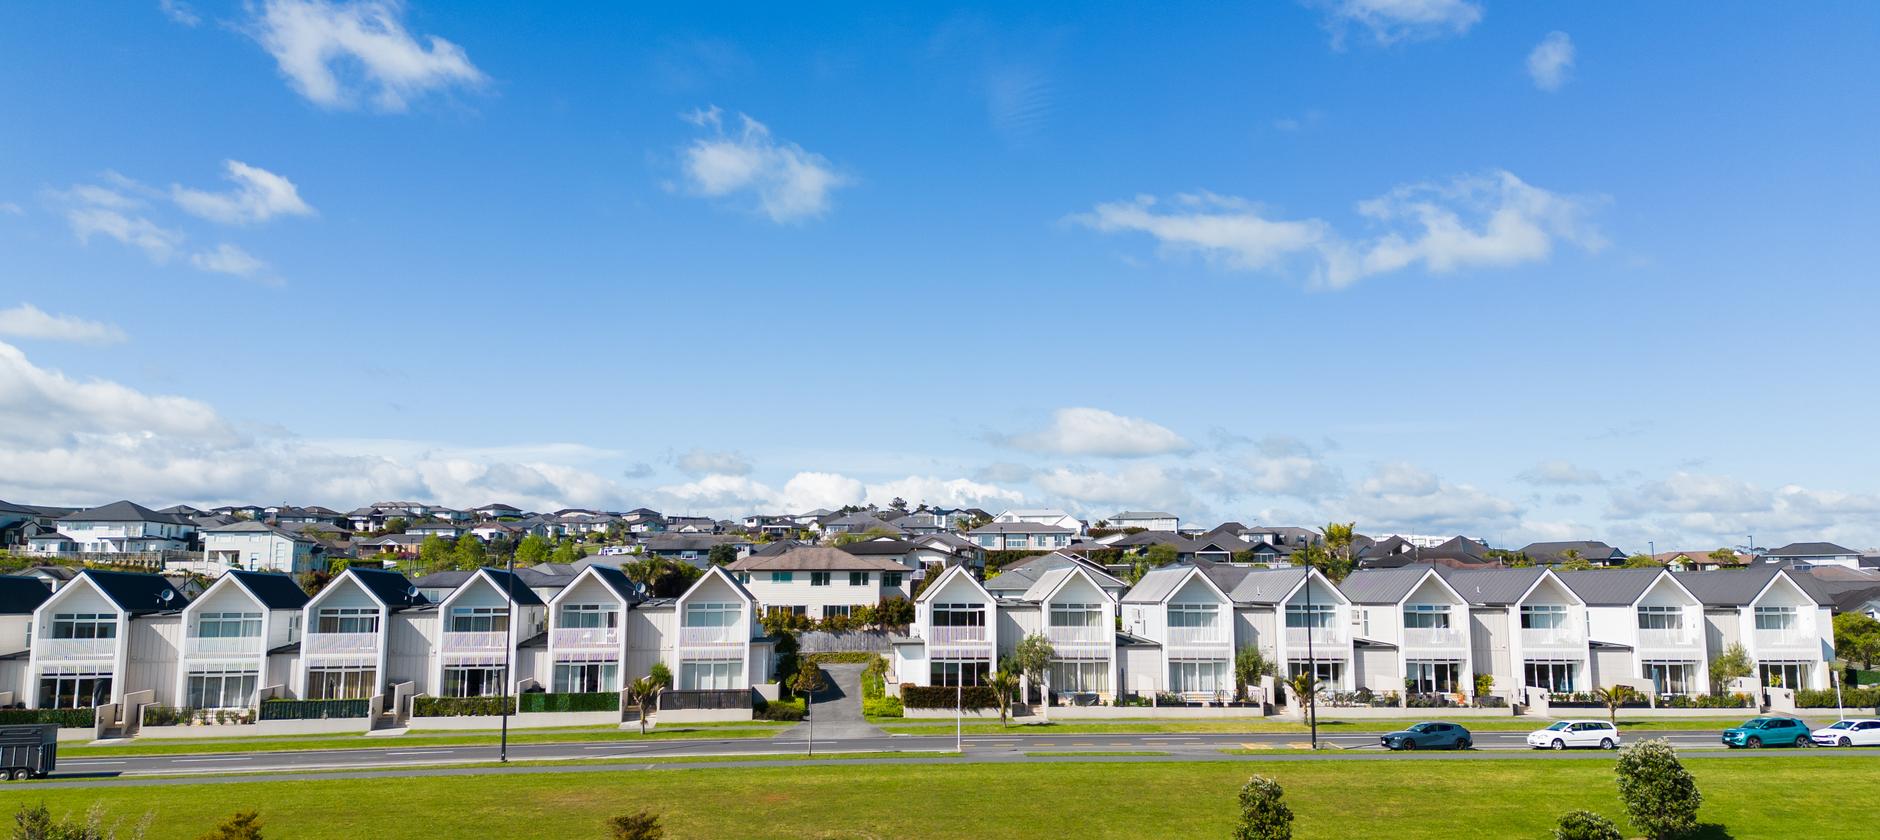 Final stages for NZ property downturn as house prices start to rise in key areas